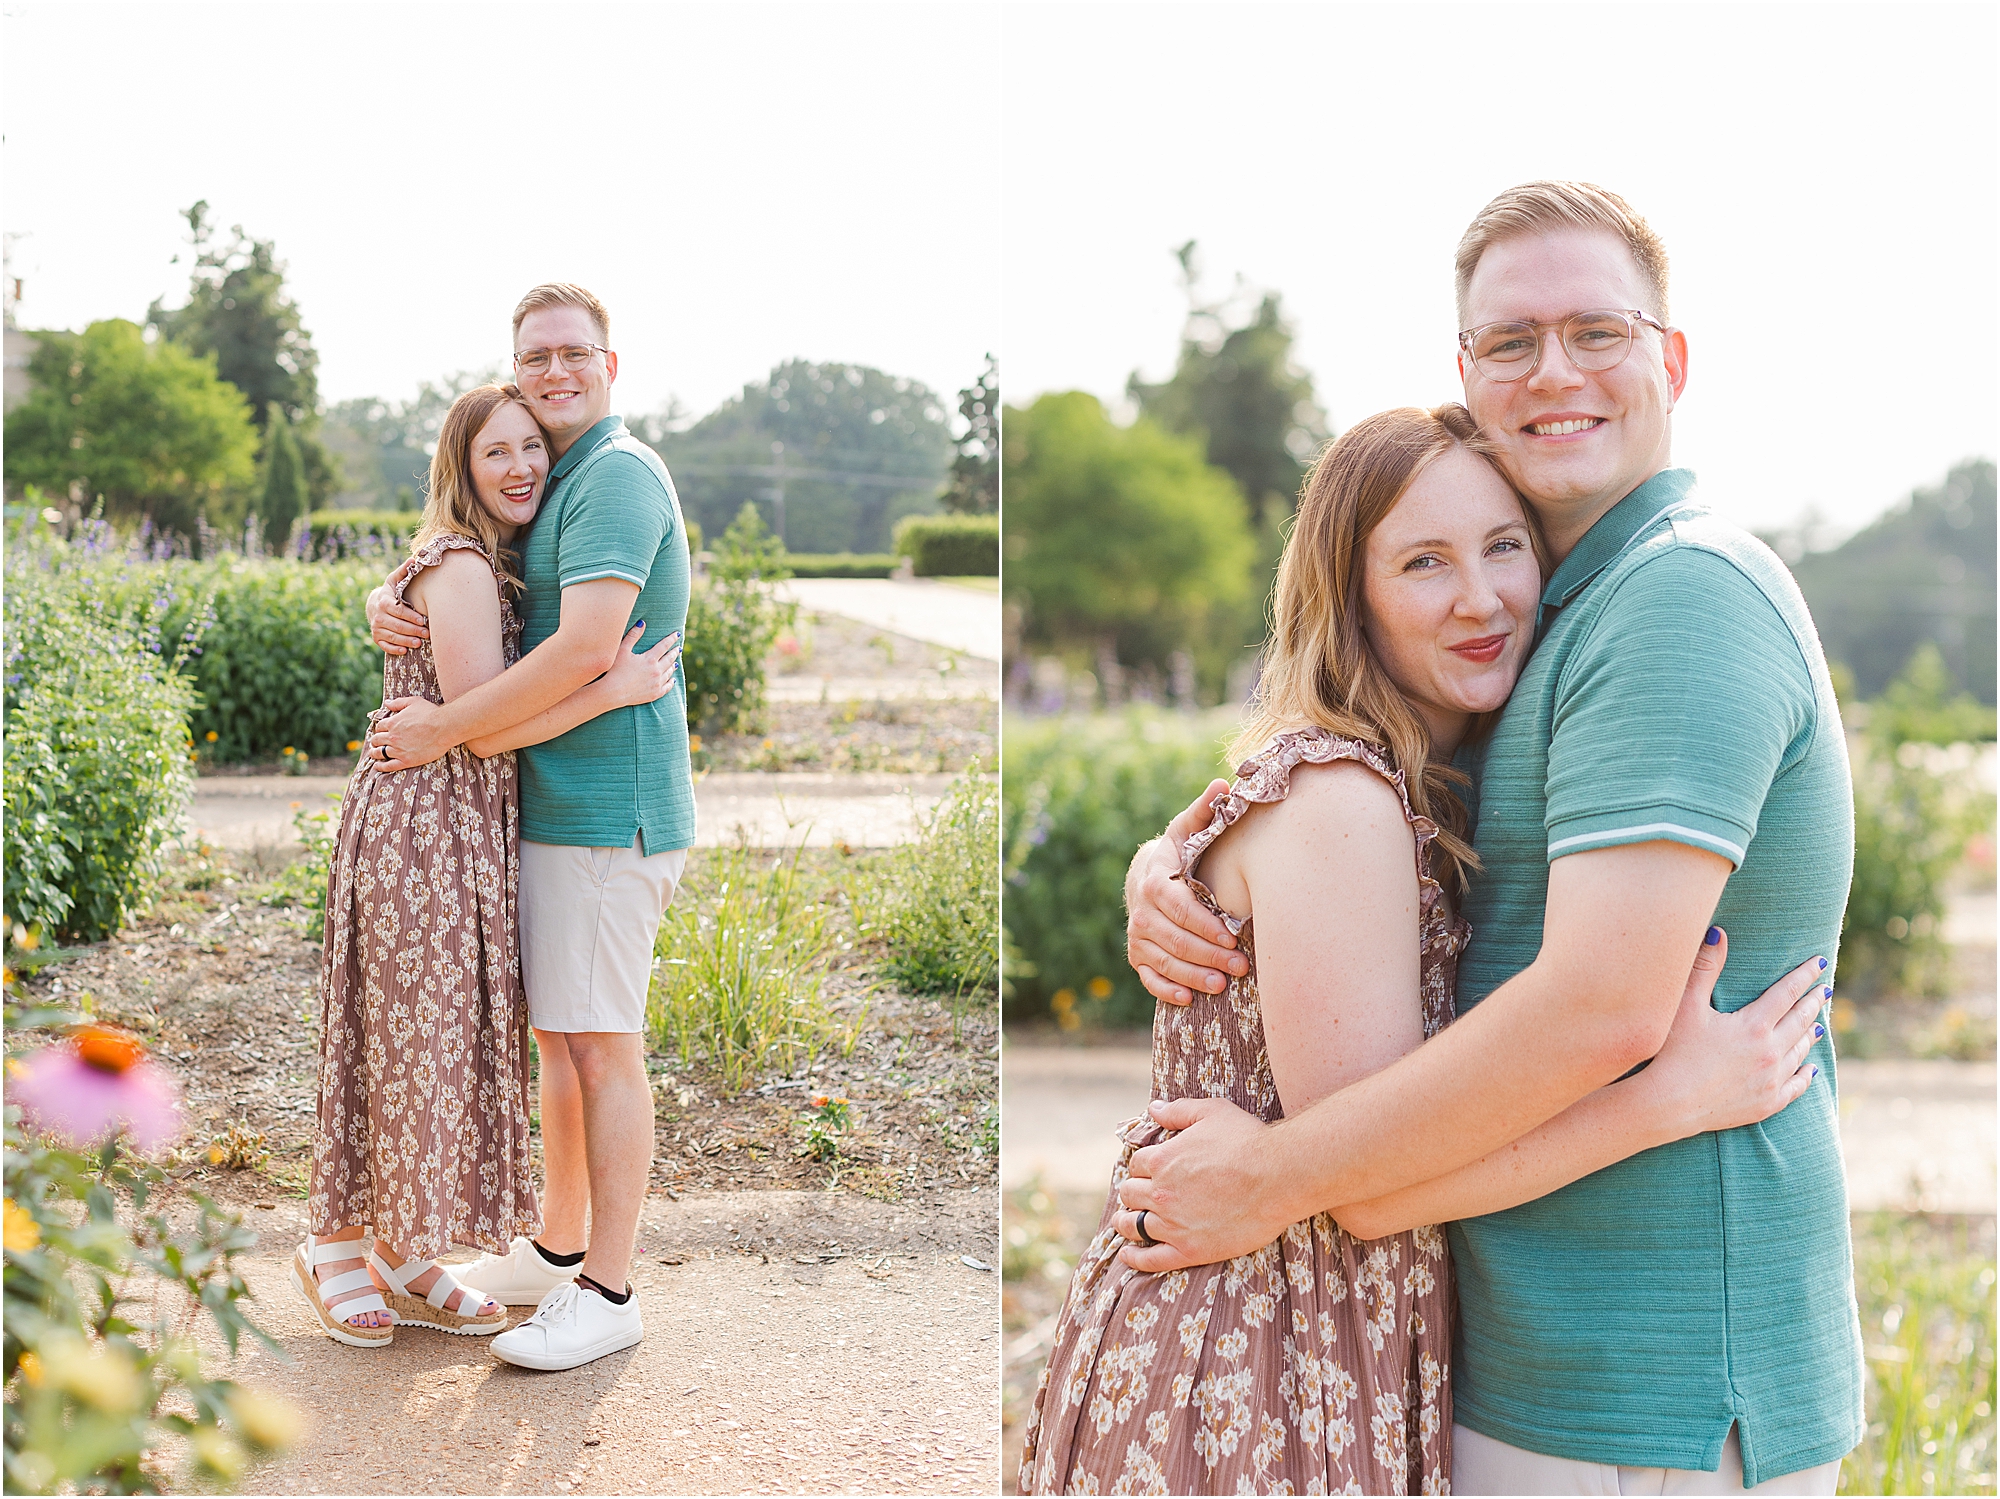 Couple embracing at a summer family photo session.